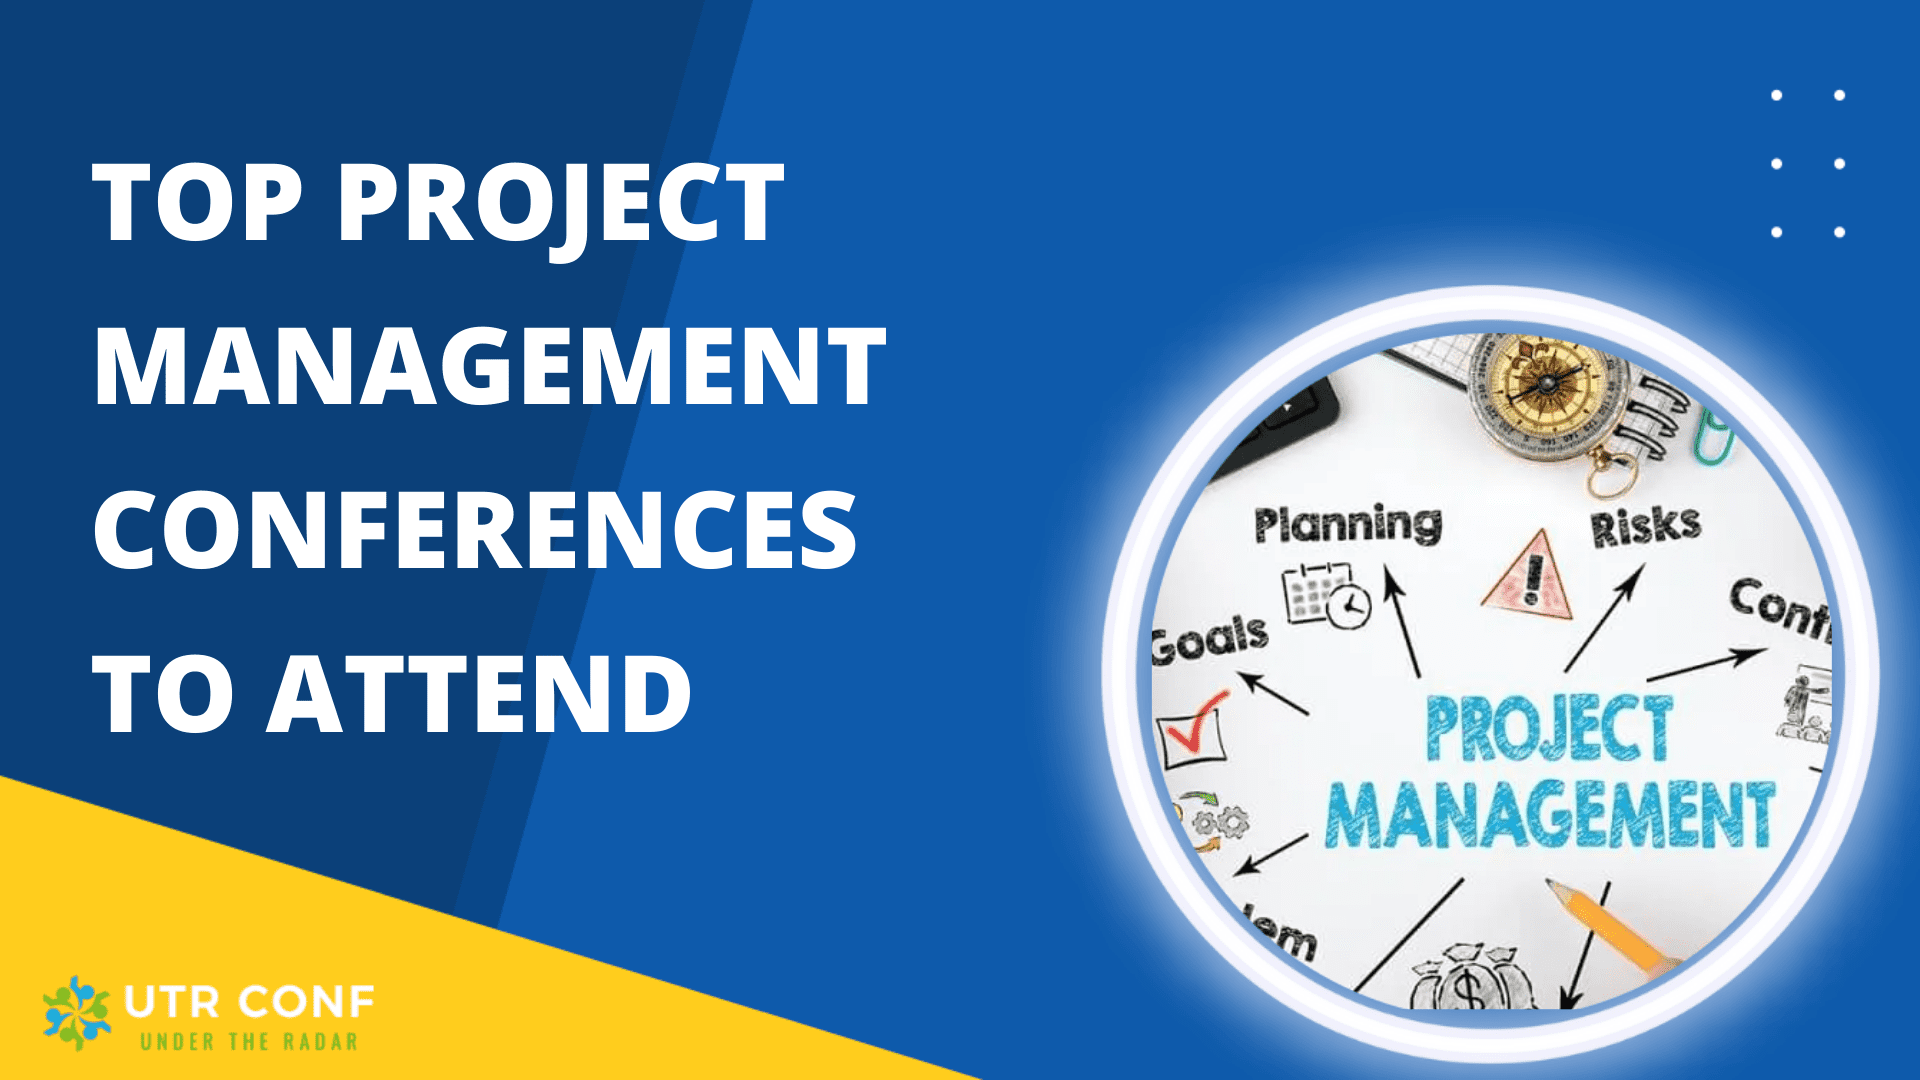 TOP PROJECT MANAGEMENT CONFERENCES TO ATTEND 